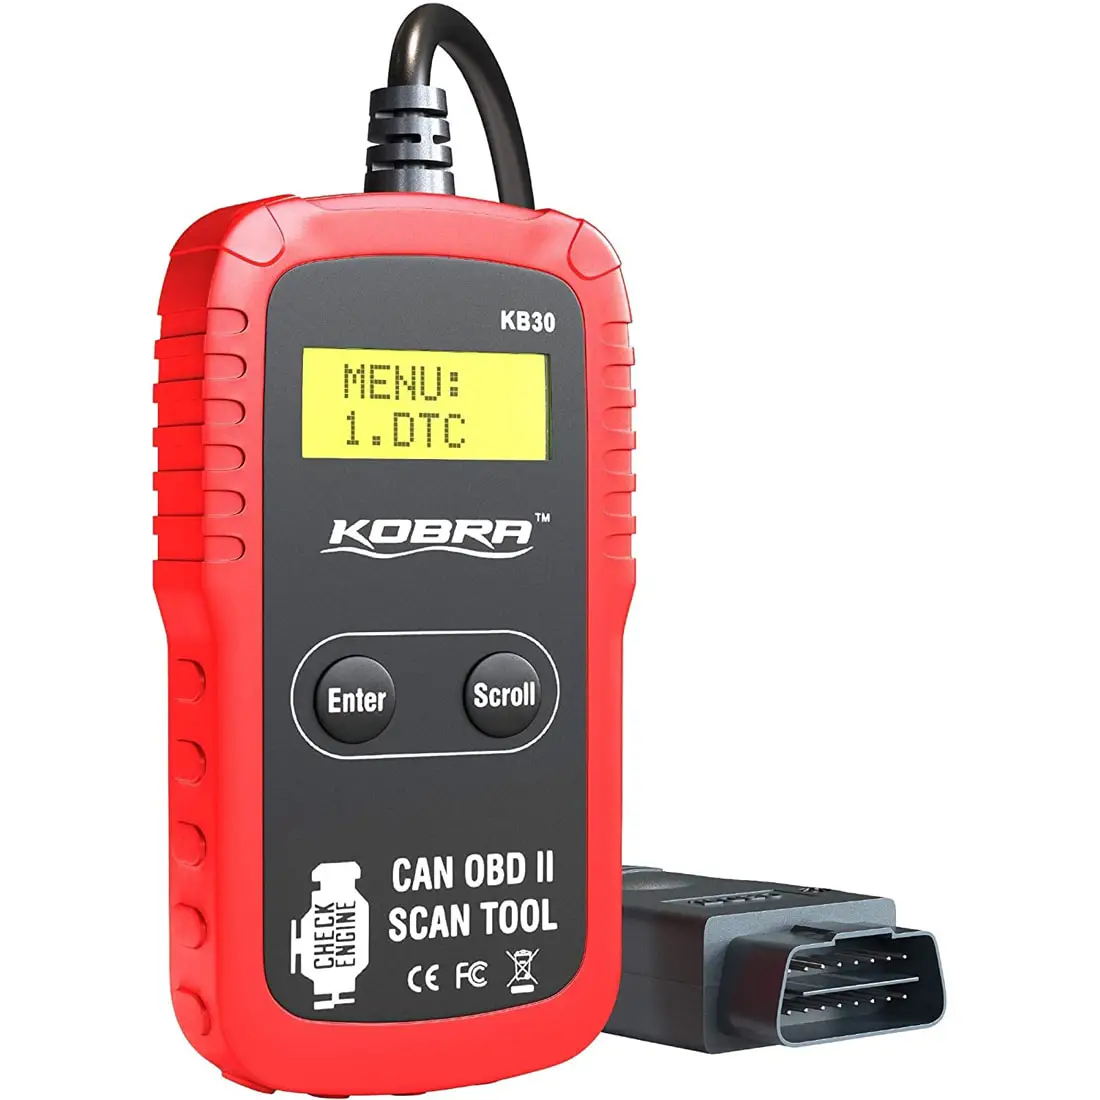 The newest version of the compact Kobra OBD2 scanner